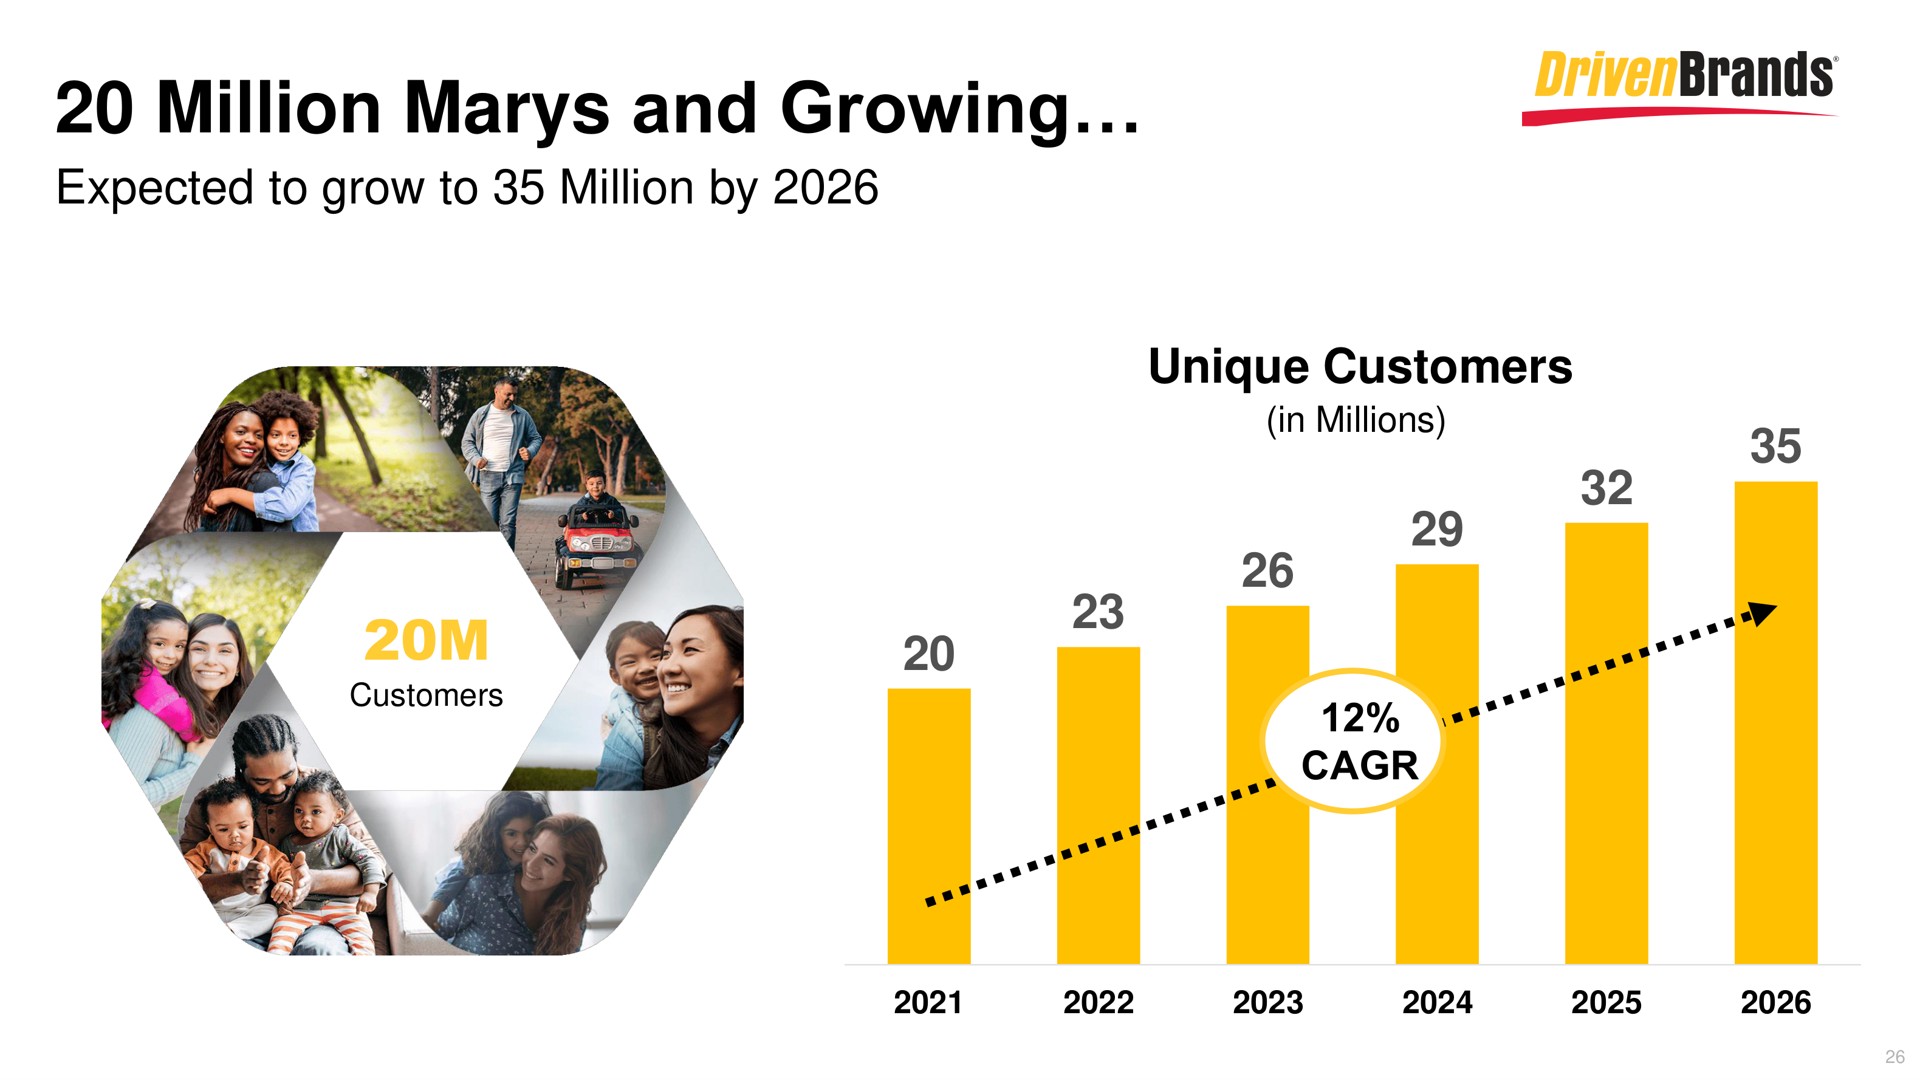 million marys and growing | DrivenBrands